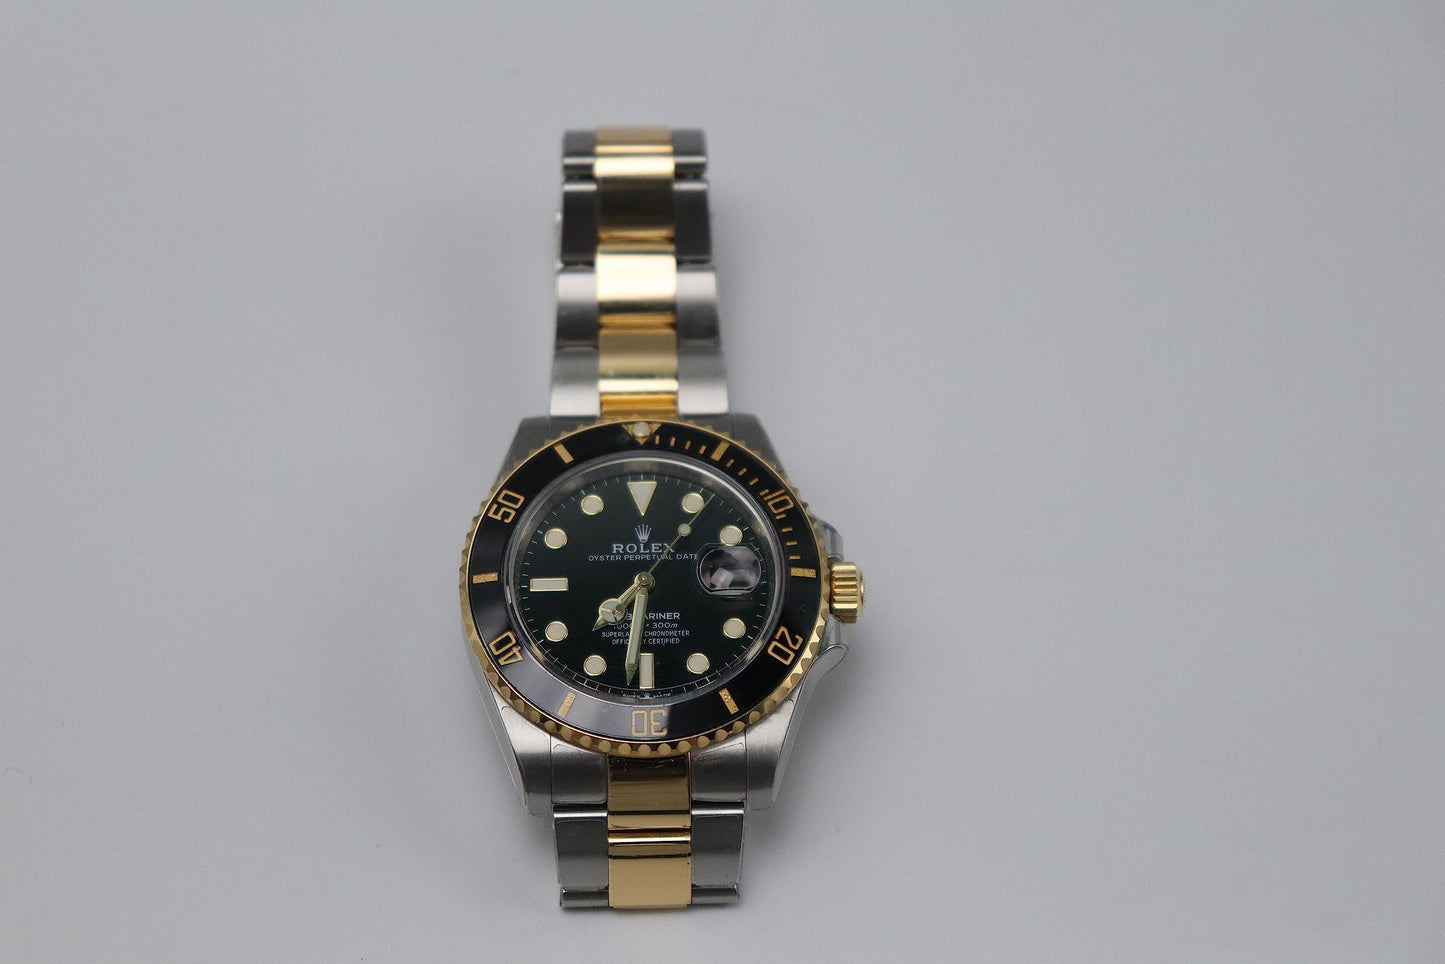 skoko [2 Pack] Full Body Protective Film Compatible with Rolex Submariner 41mm (1.61inch) , Glossy Clear Skin, Full Coverage, Anti Scartch, Easy installation